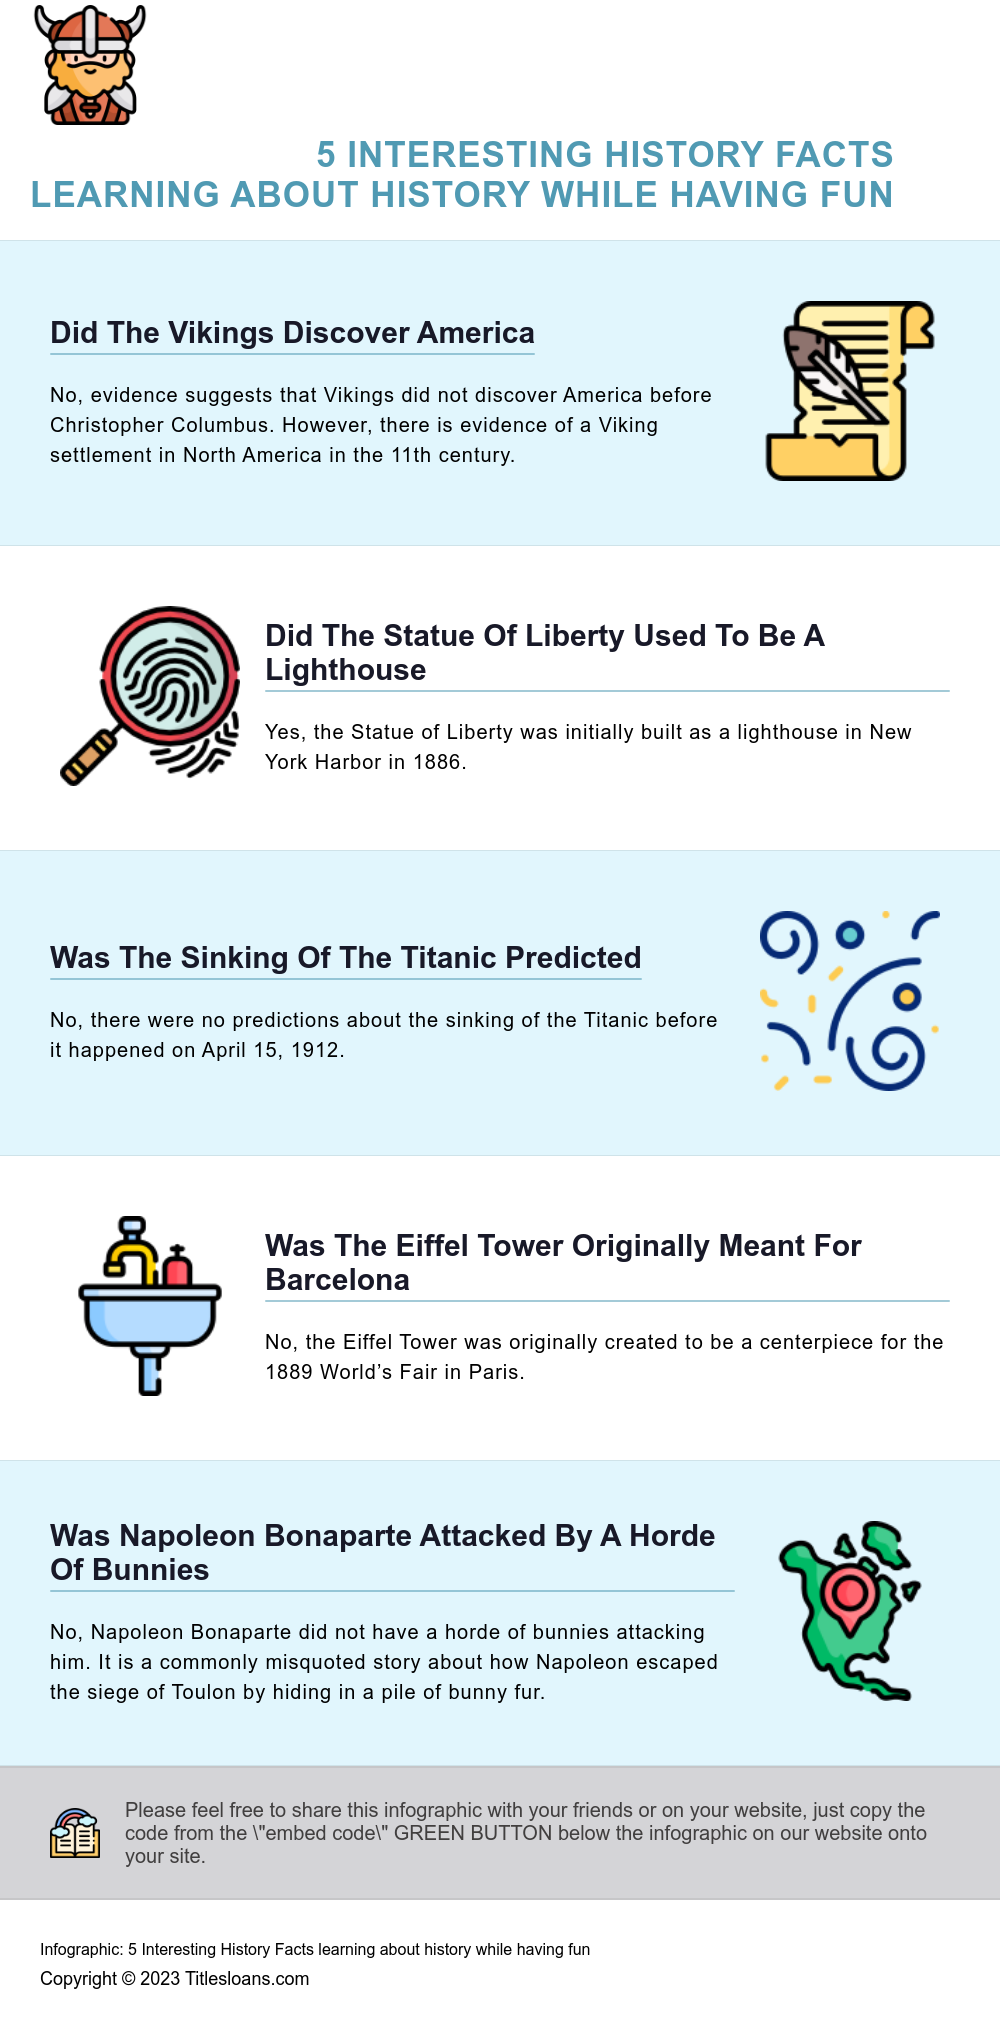 Infographic: 5 Interesting History Facts learning about history while having fun